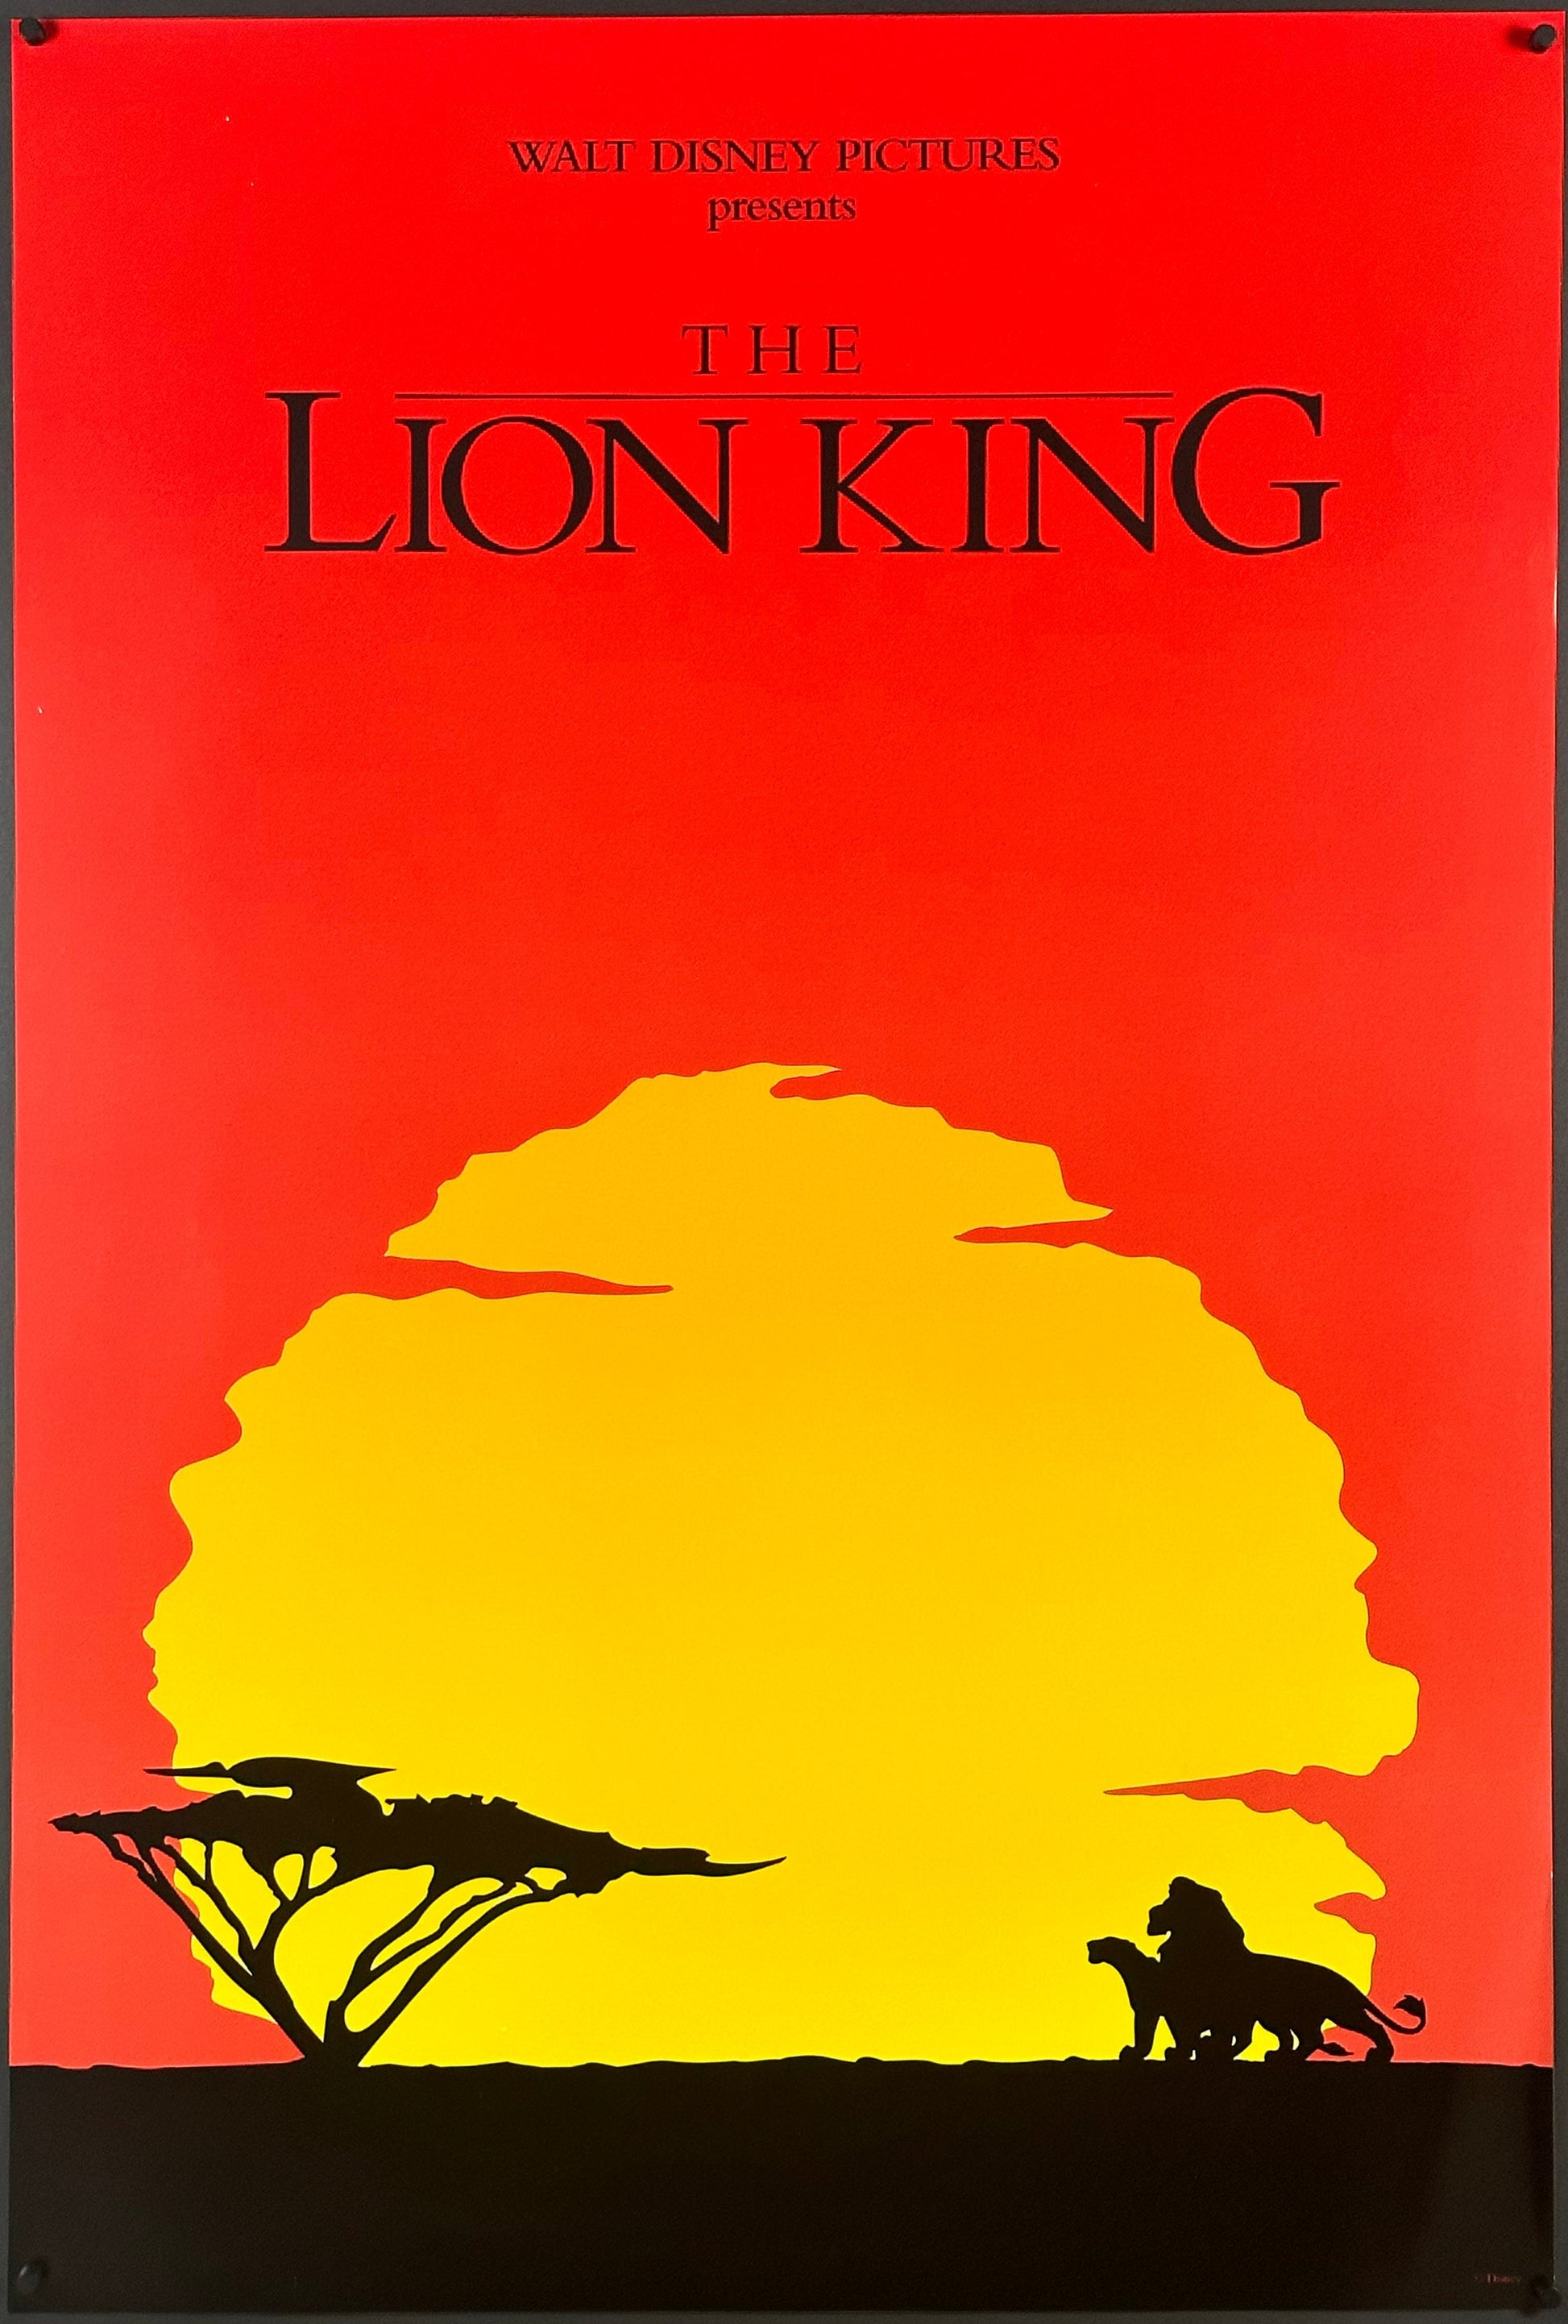 The Lion King - posterpalace.com